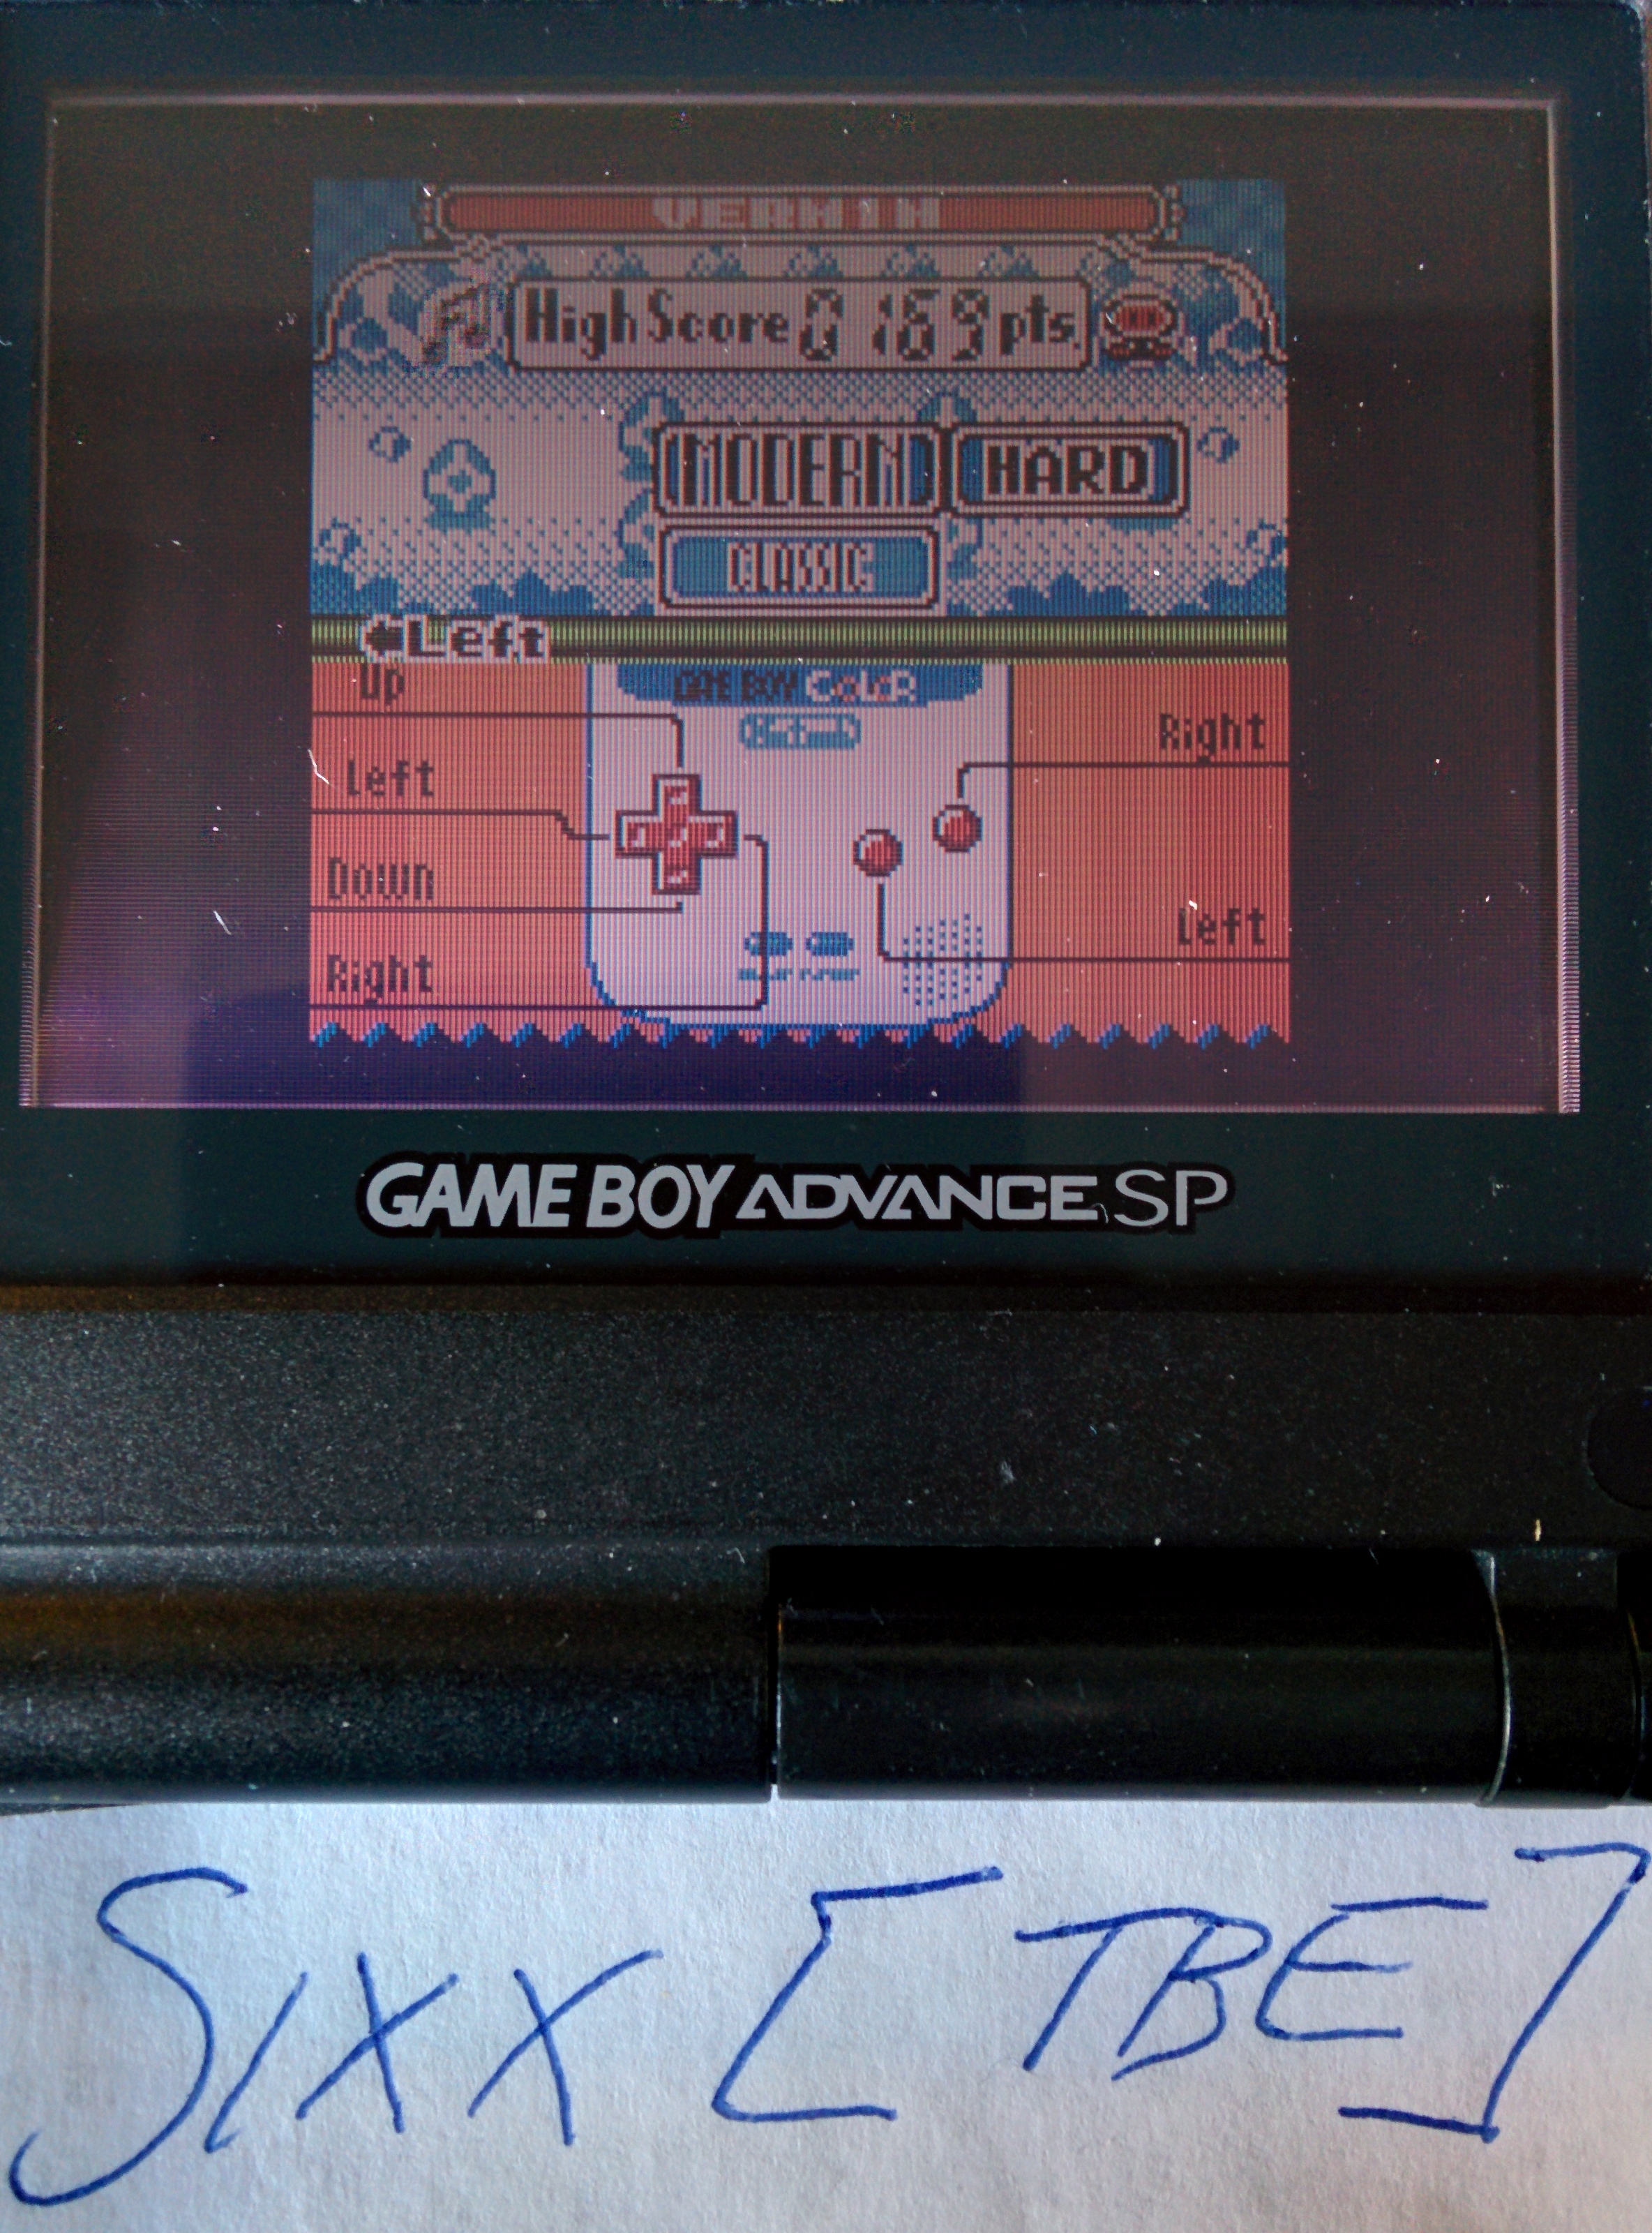 Sixx: Game & Watch Gallery 2: Vermin: Modern: Hard (Game Boy Color) 169 points on 2014-08-29 04:04:30